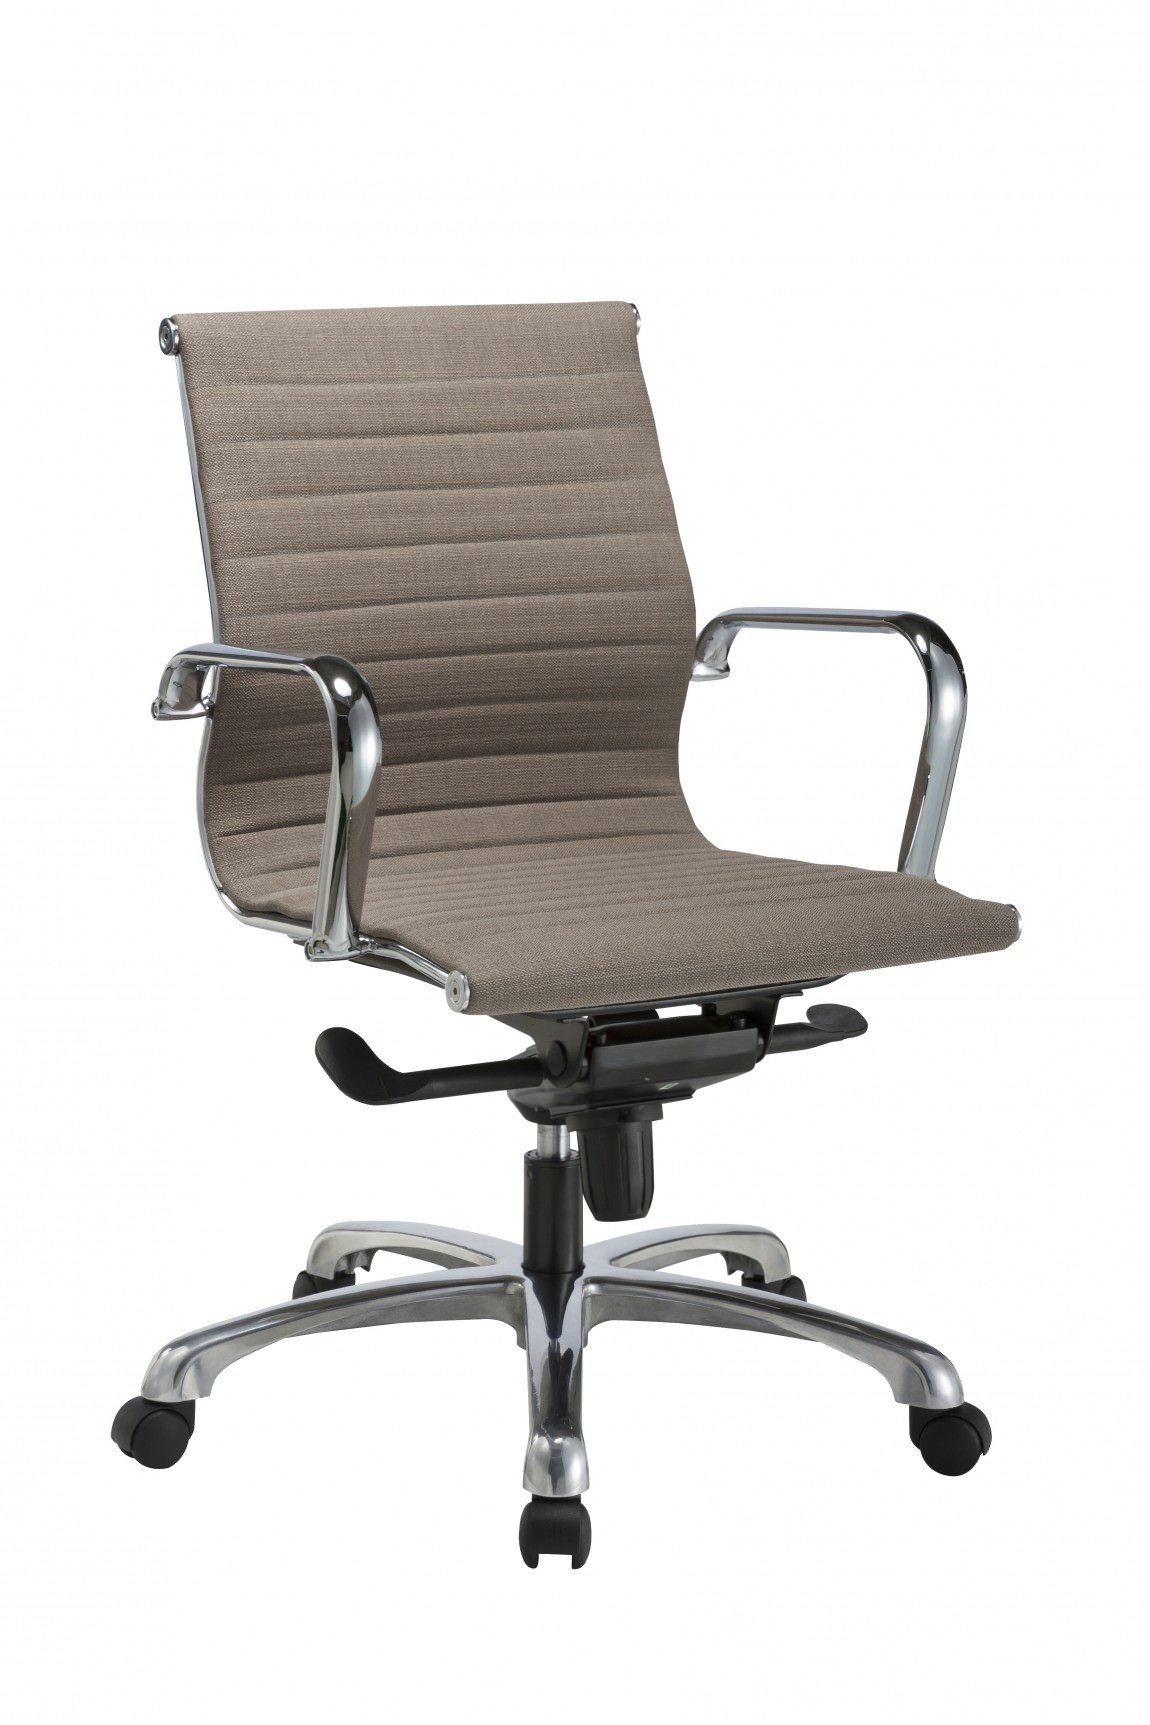 Modern Mid Back Office Chair